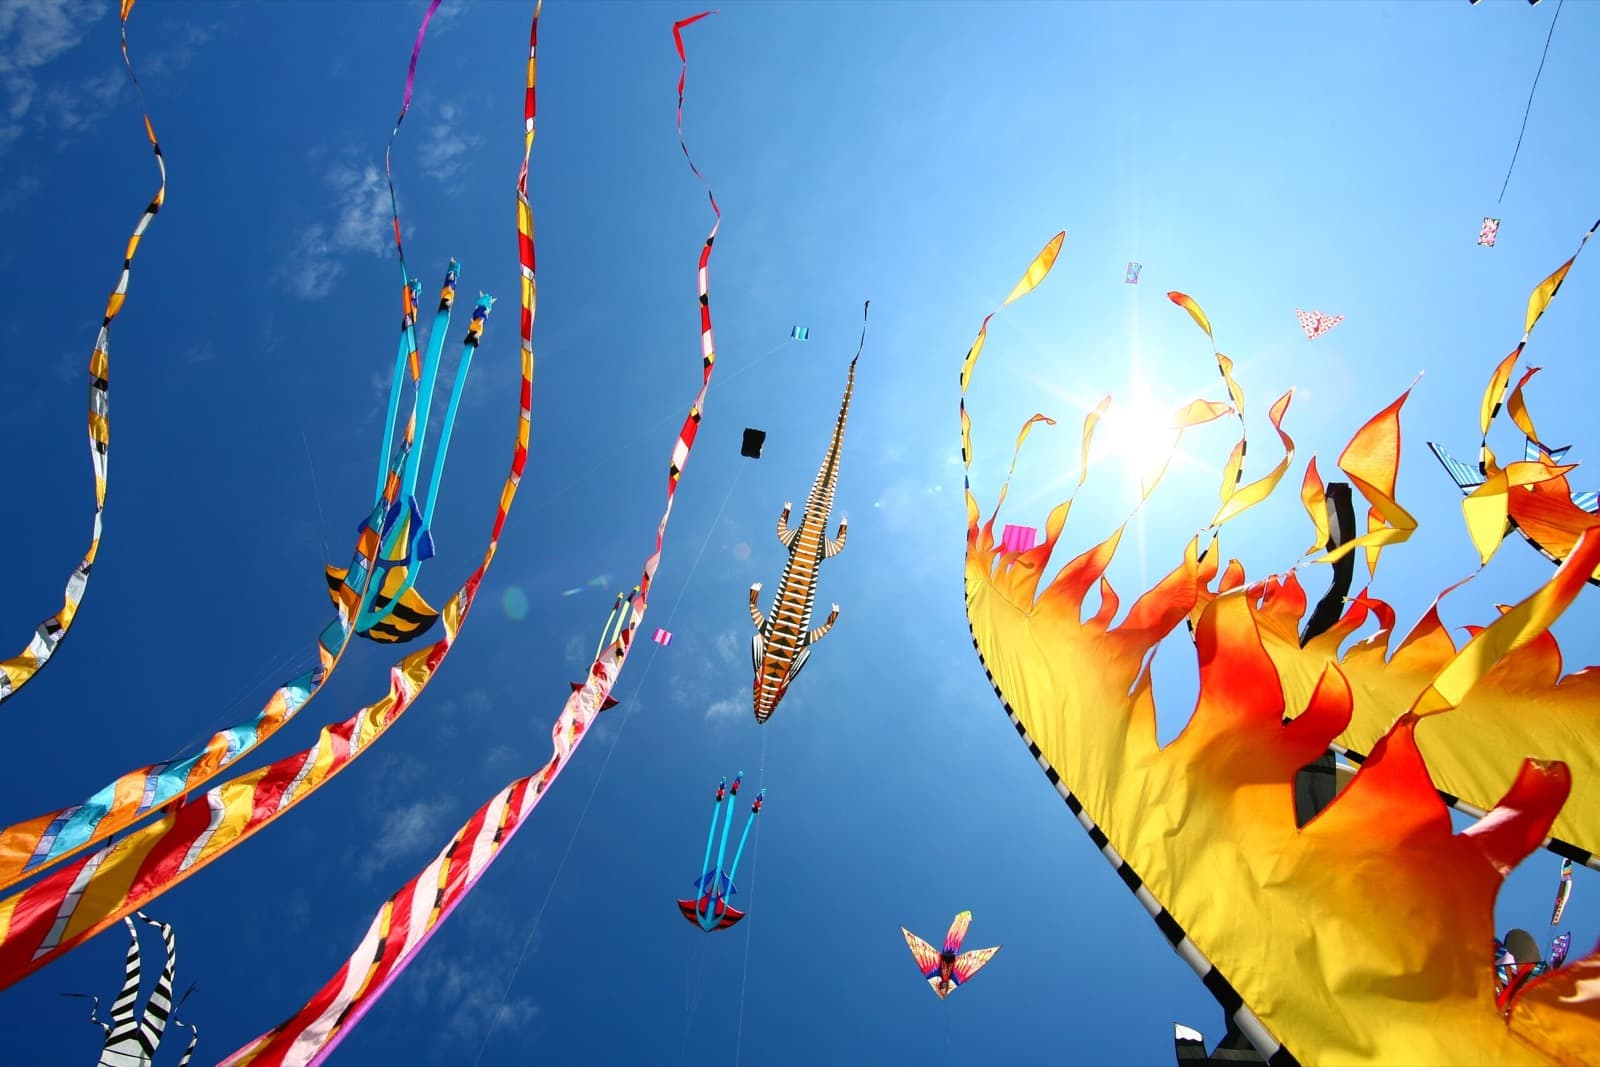 Kites and Balloons: Festivals in the skies of Emilia-Romagna